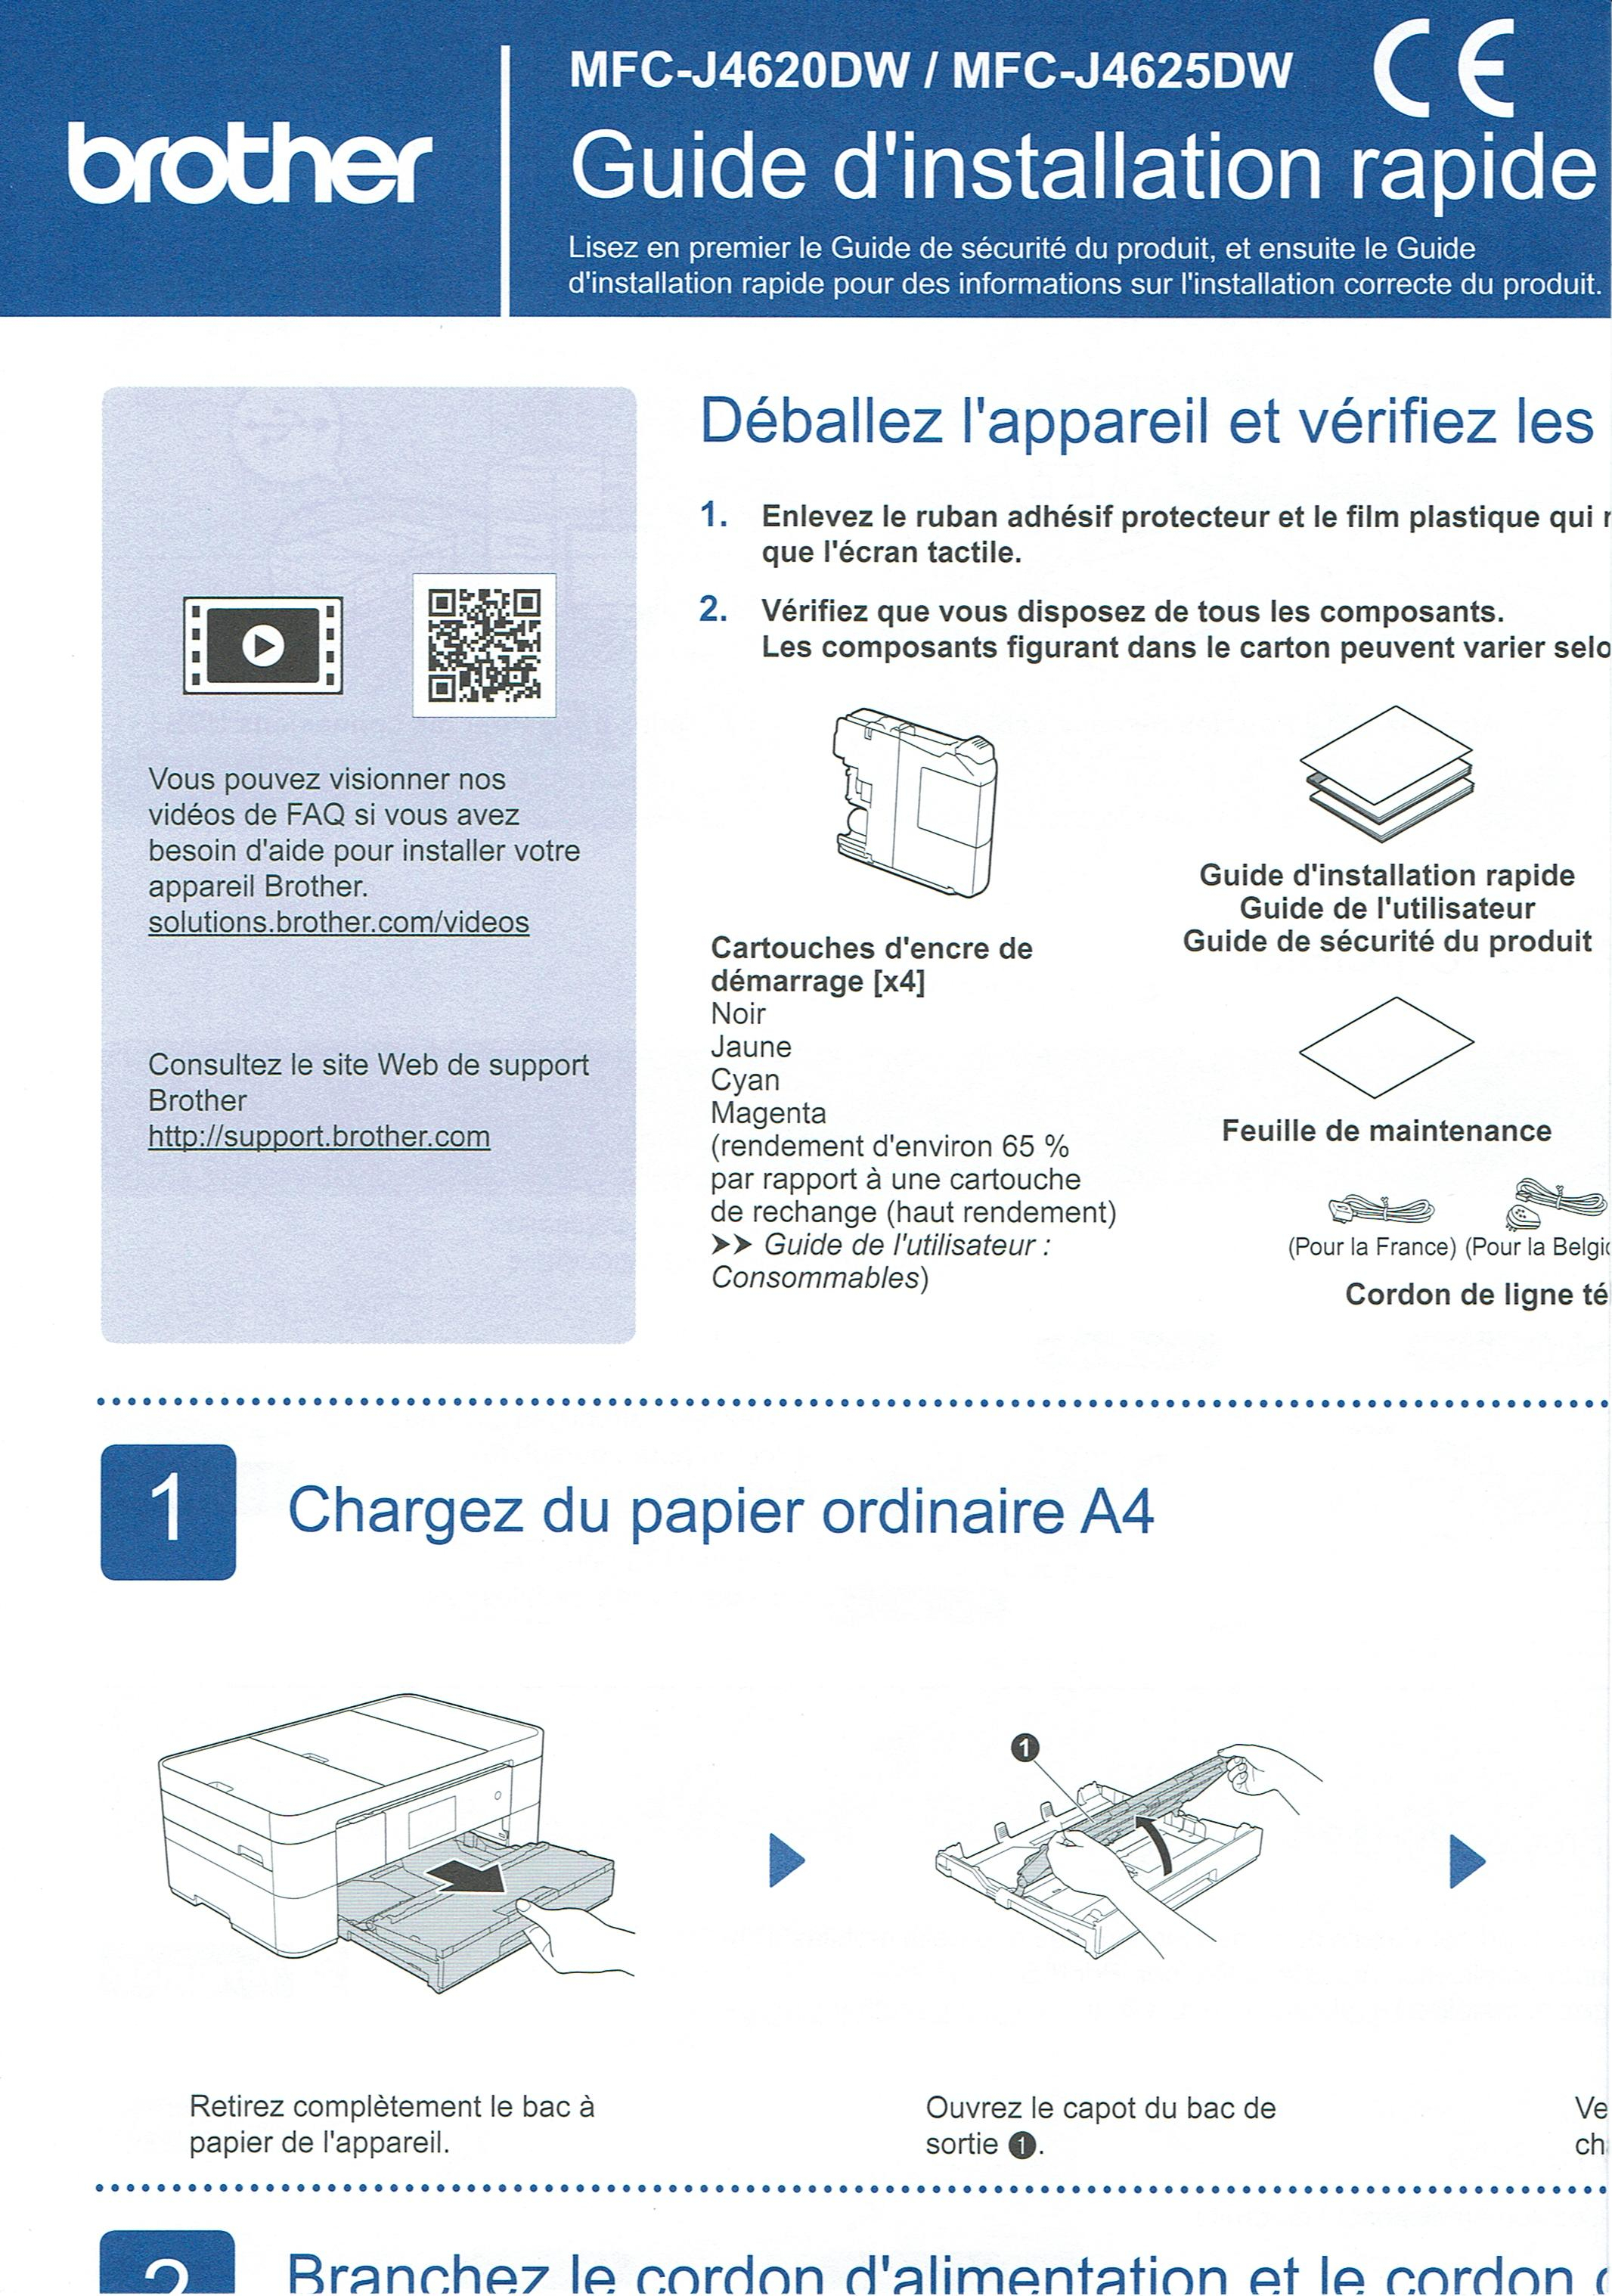 guide d'installation rapide